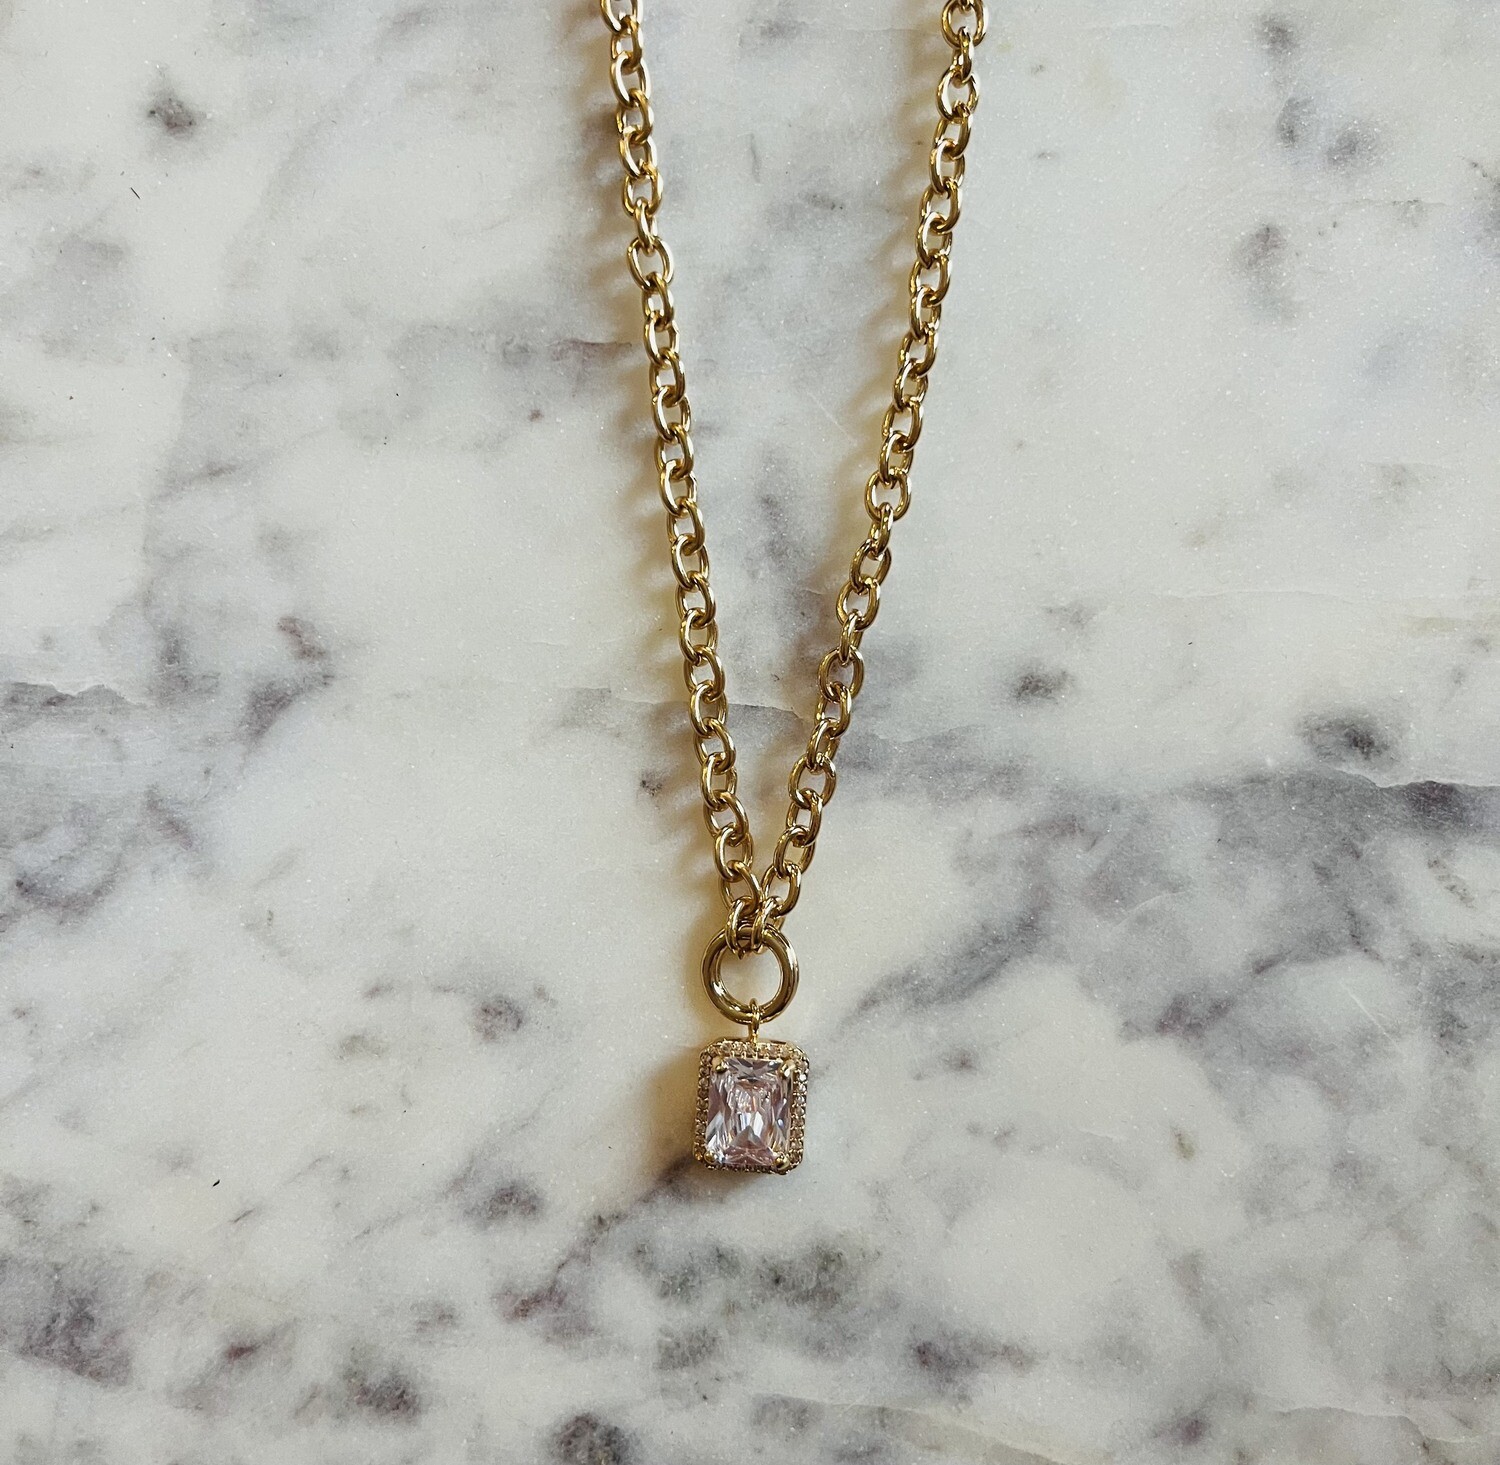 Gold Necklace With Crystal Pendant 